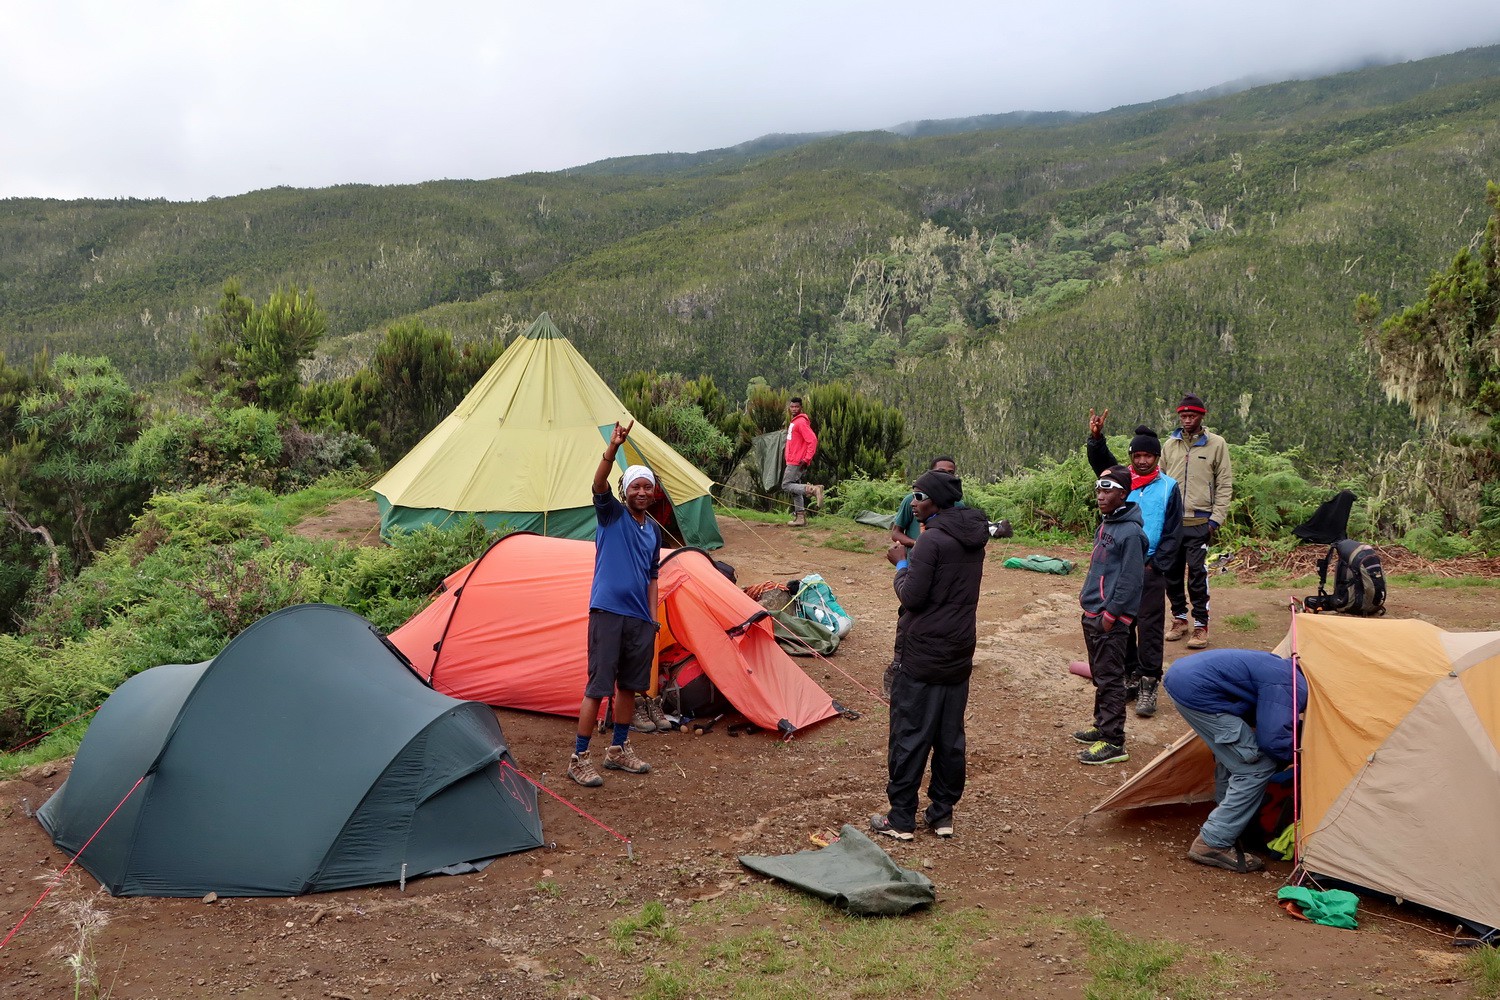 In the 3020 meters high Machame Camp